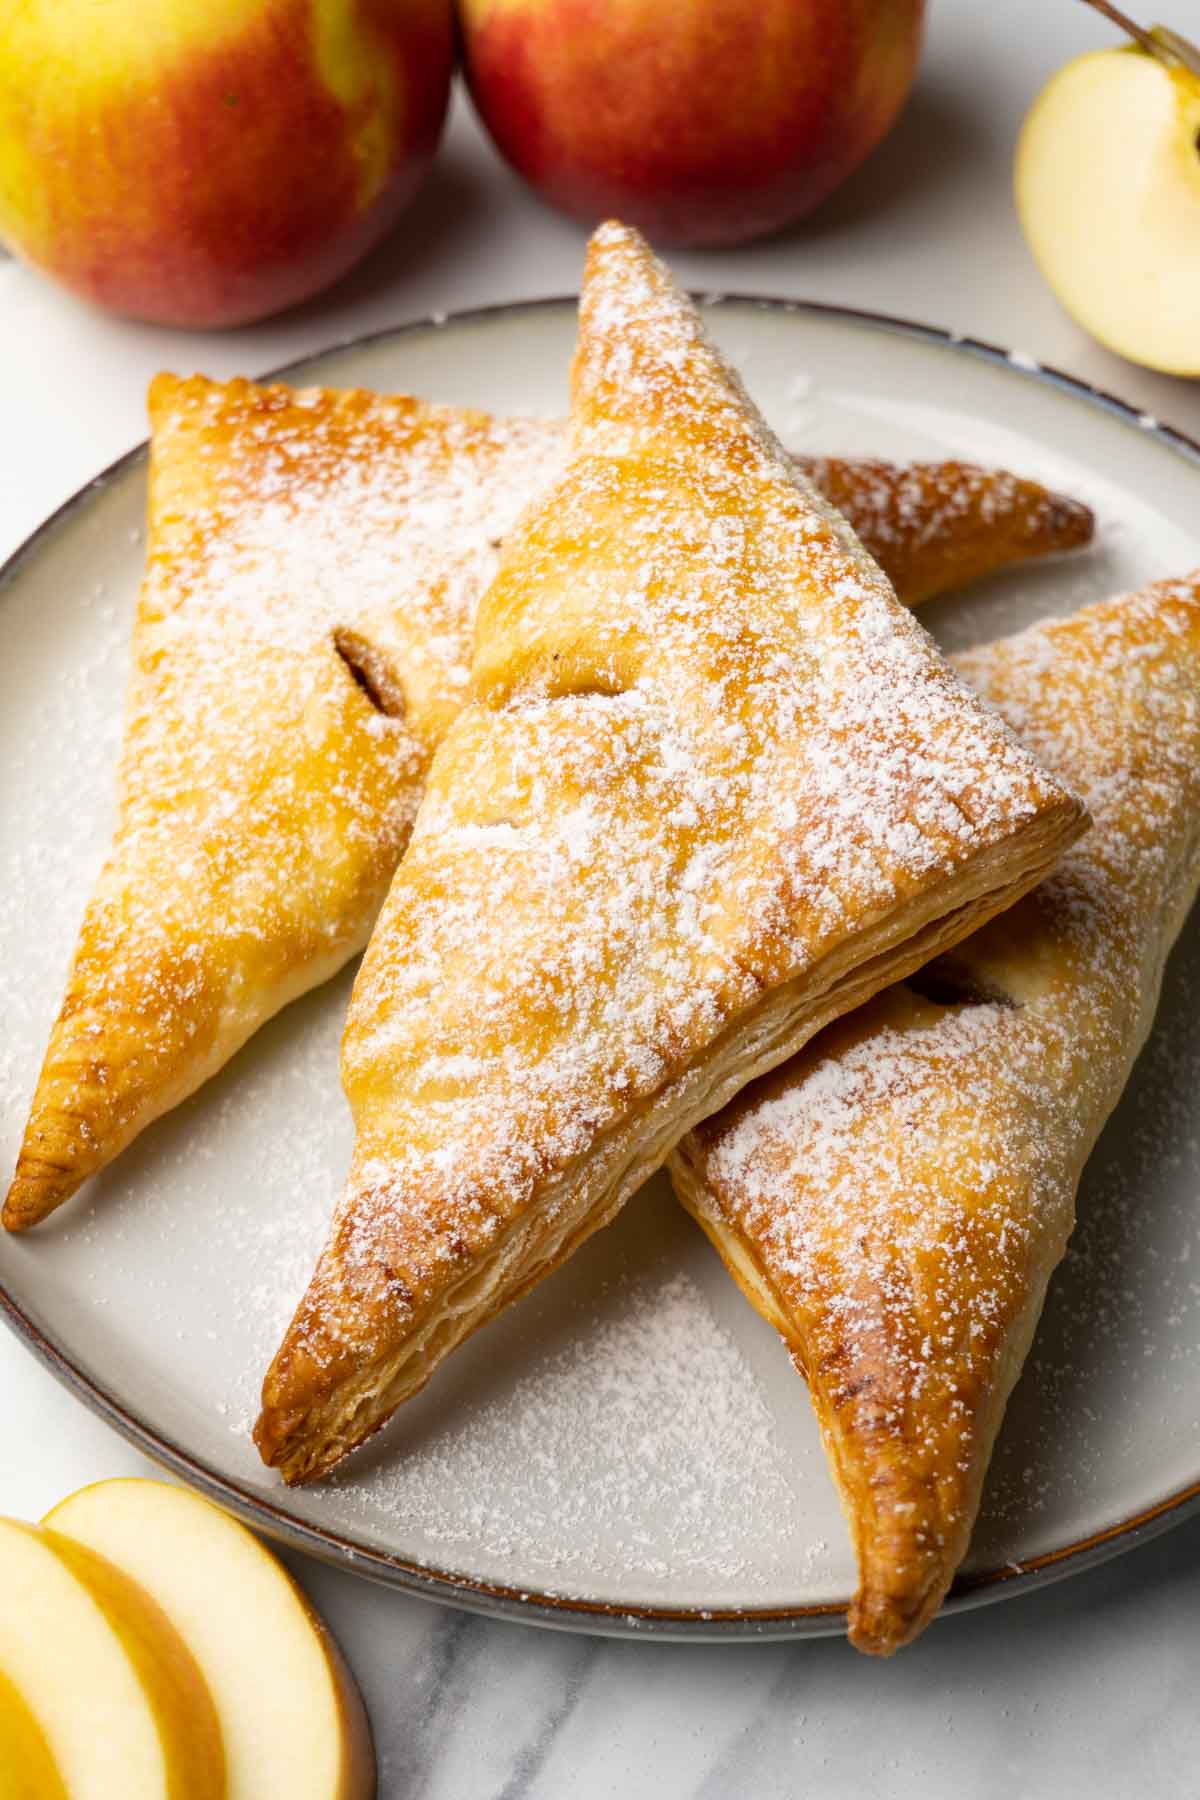 Apple turnovers dusted in powdered sugar on a plate. Fresh apples are lying around.